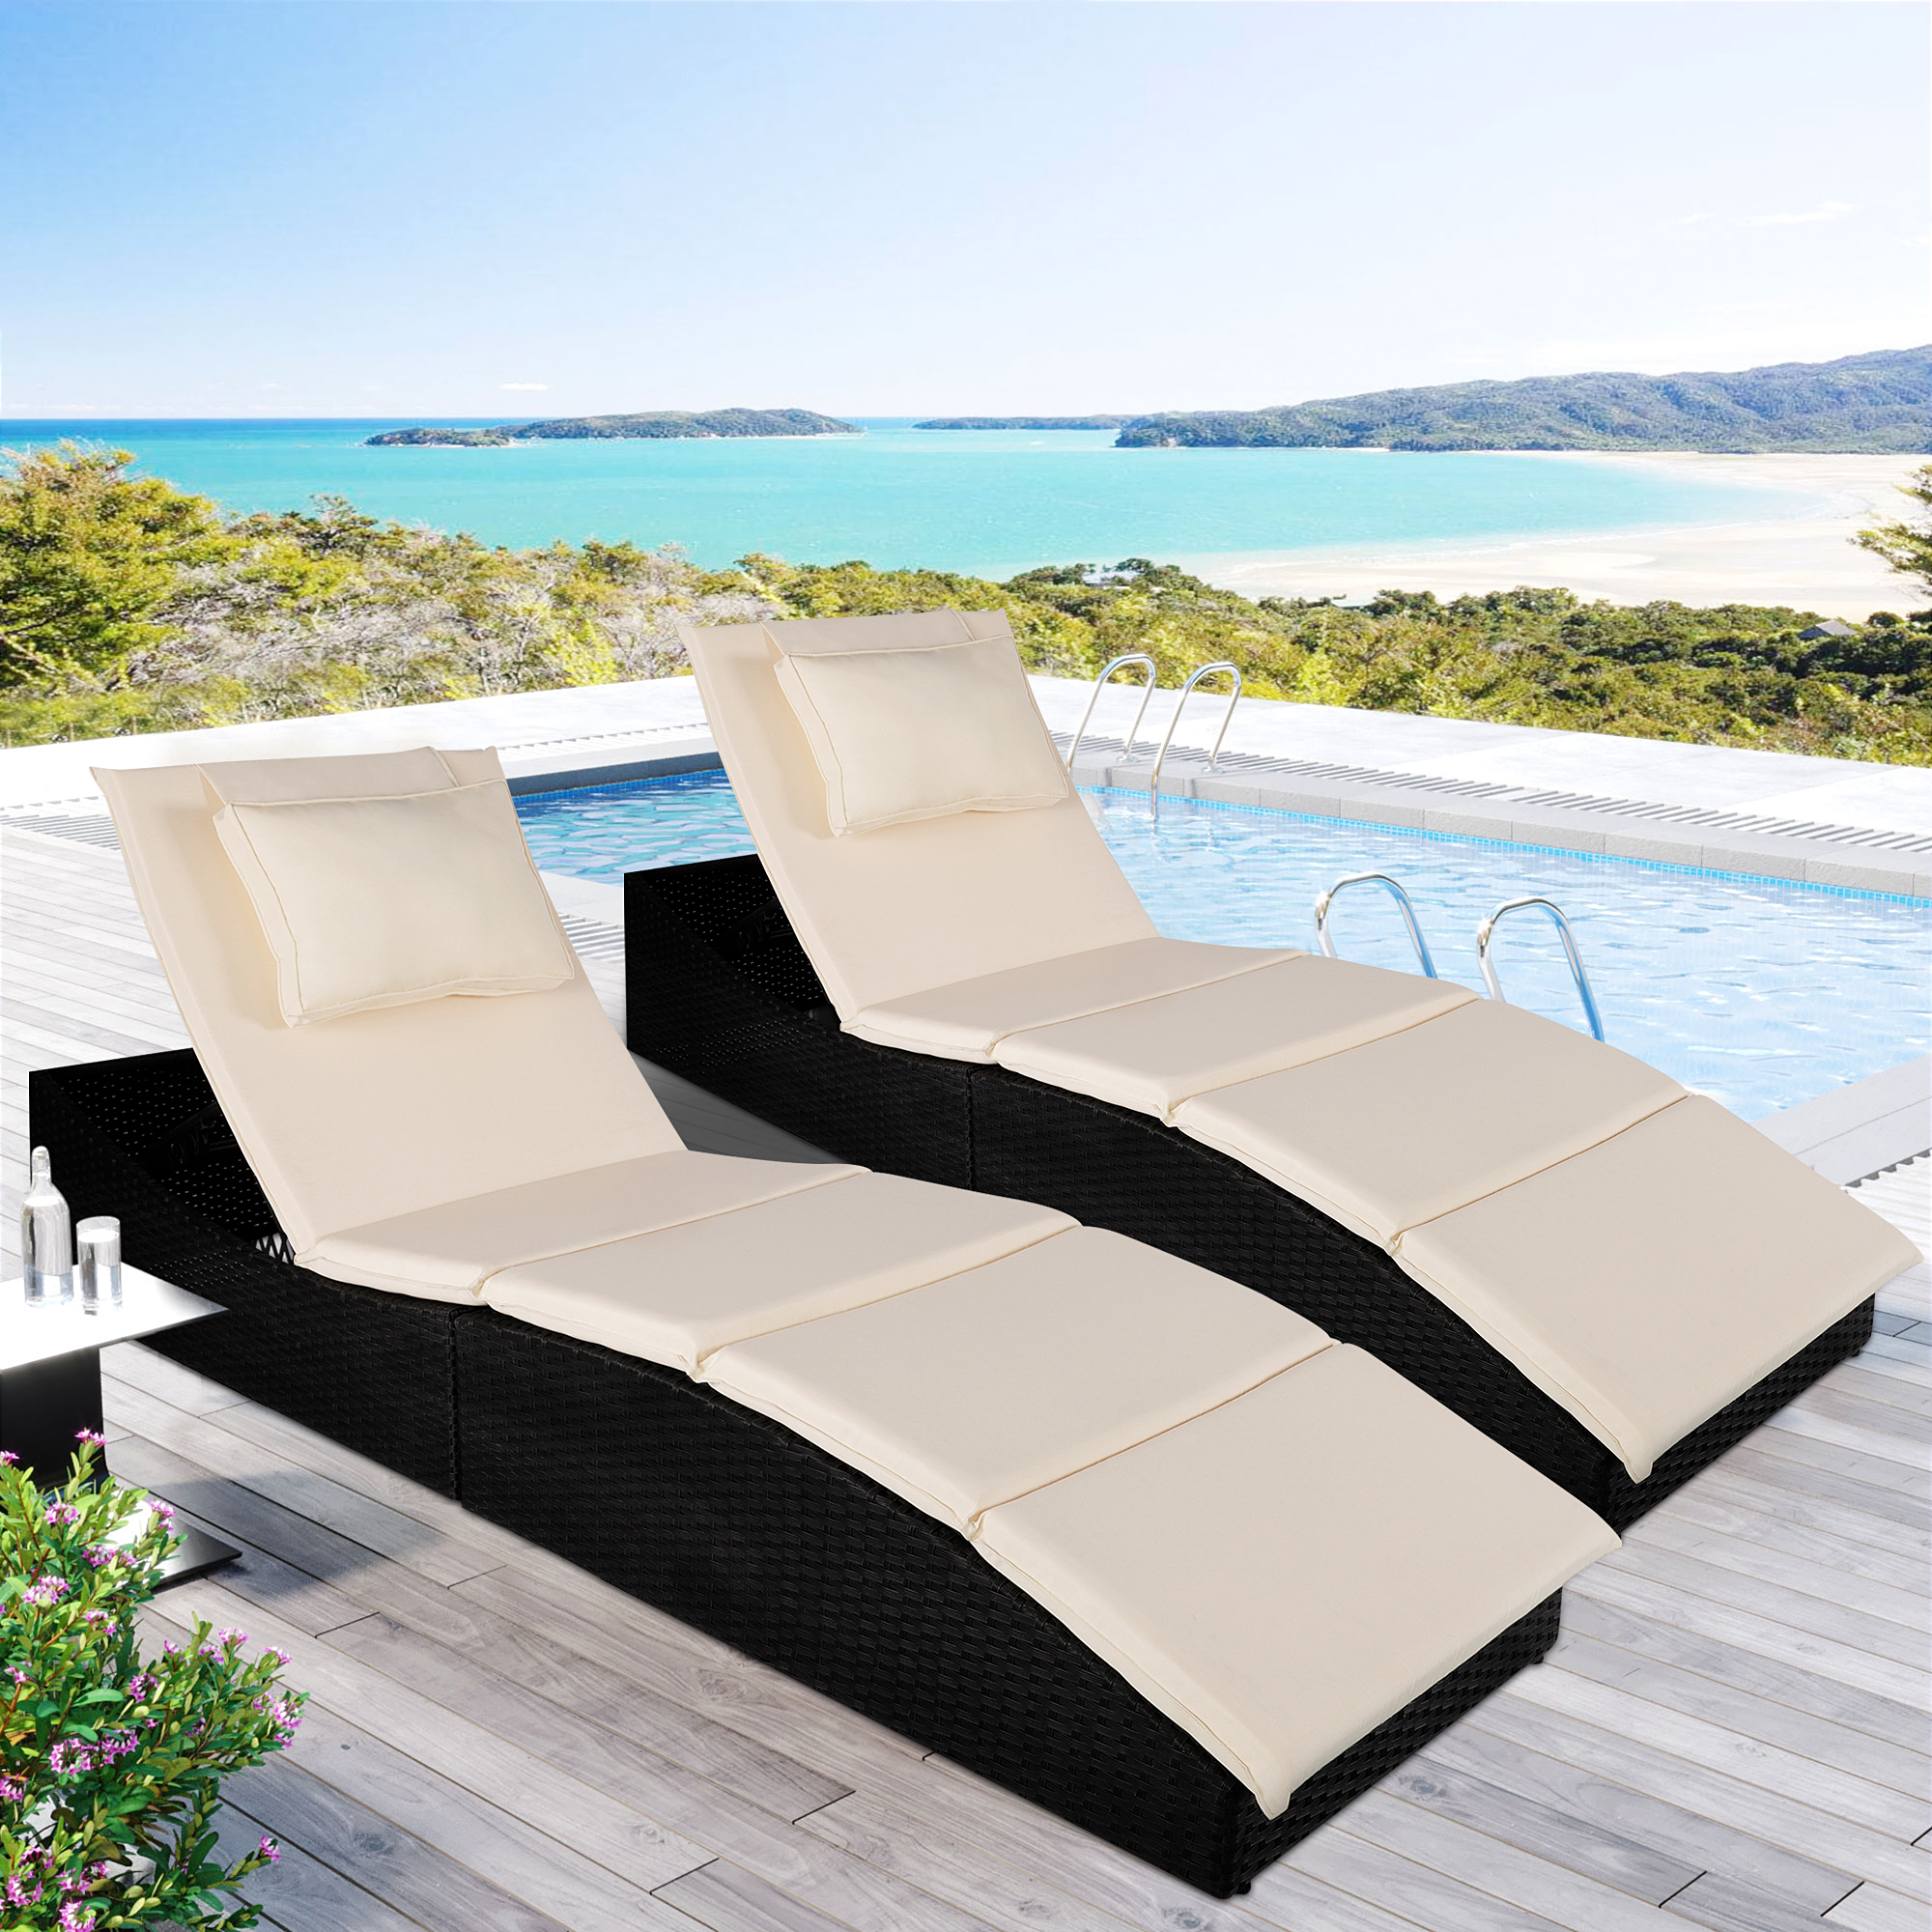 2-Piece Patio Rattan Pool Lounge Chair with Cushion, 5 Adjustable Positions Folding Patio Chaise Lounge, Outdoor Wicker Beach Reclining Chair, PE Rattan Beach Lounger Chair for Balcony Deck Patio, T25 - image 1 of 9